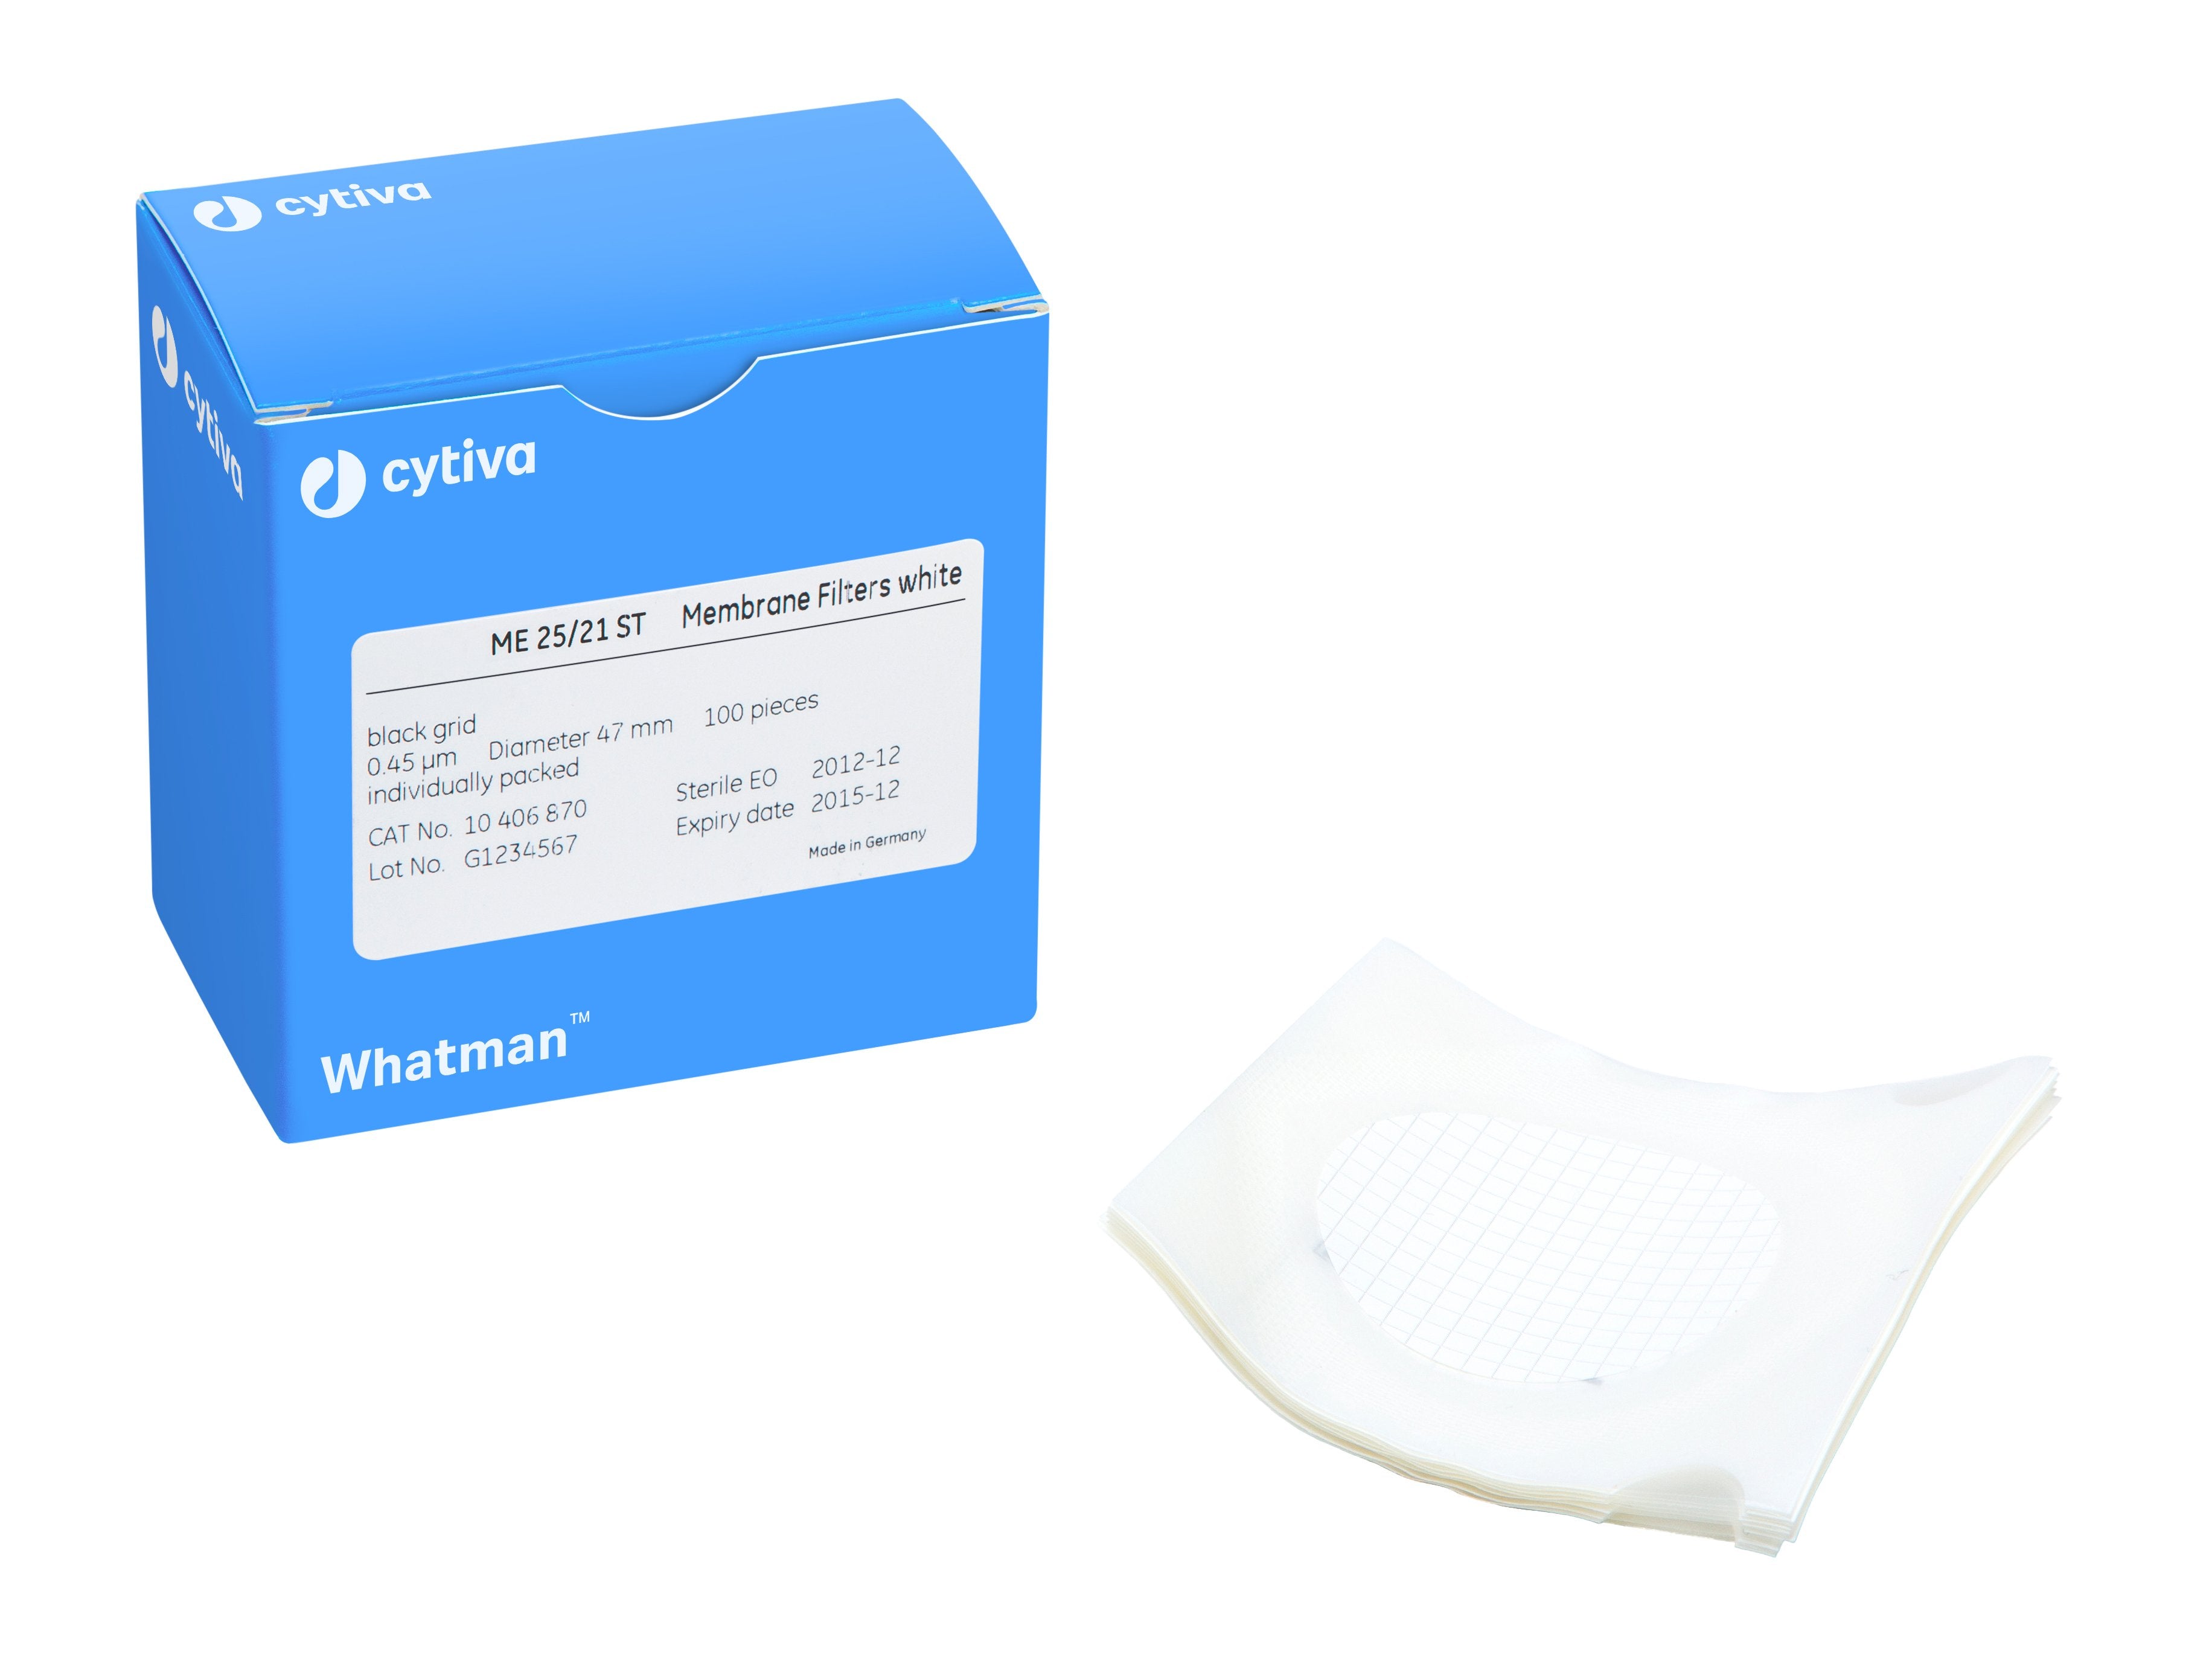 Whatman 7141-114 Filter Circles, 47mm Dia, Mixed Cellulose Ester WME White/ Black Grid 3.1mm without Pad, Sterile, 0.45 micrometer Pore Size, 100/pk (PN: 7141-114)